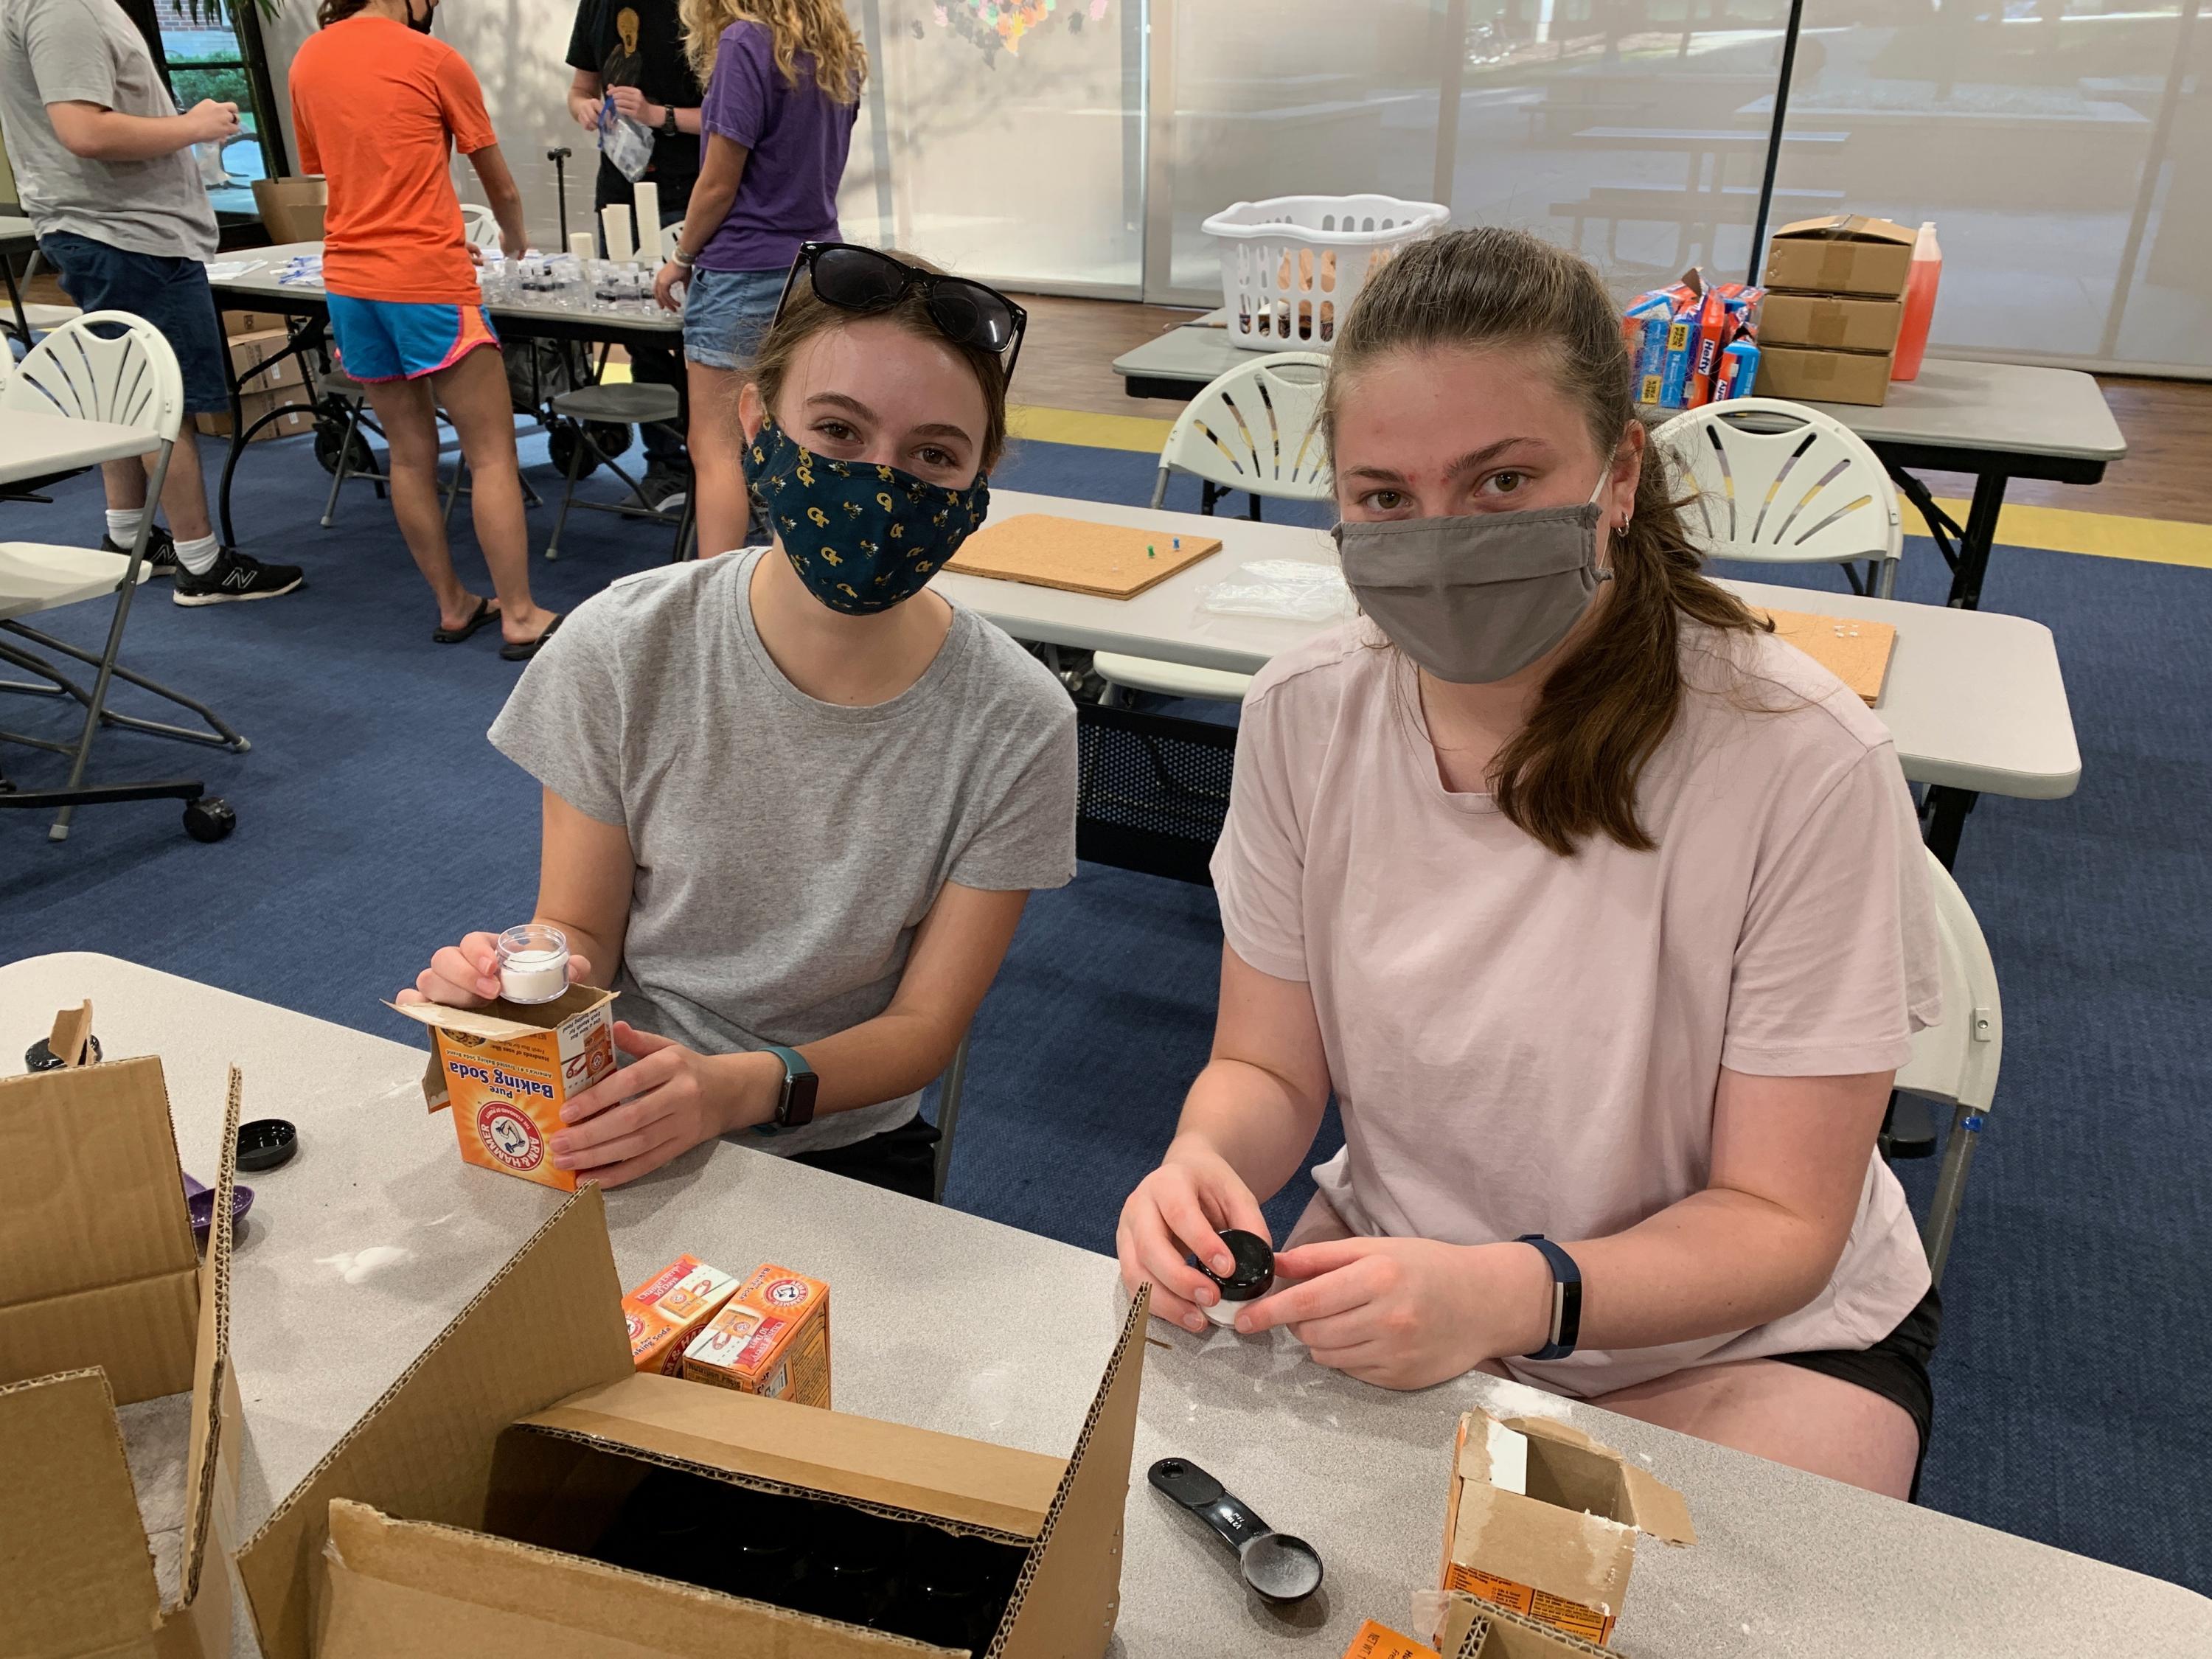 Little Einstein Organization volunteers Paige Holland (left) and Grace May prepare at-home science kits for Atlanta K-5 students. (Photo: Olivia Gravina)